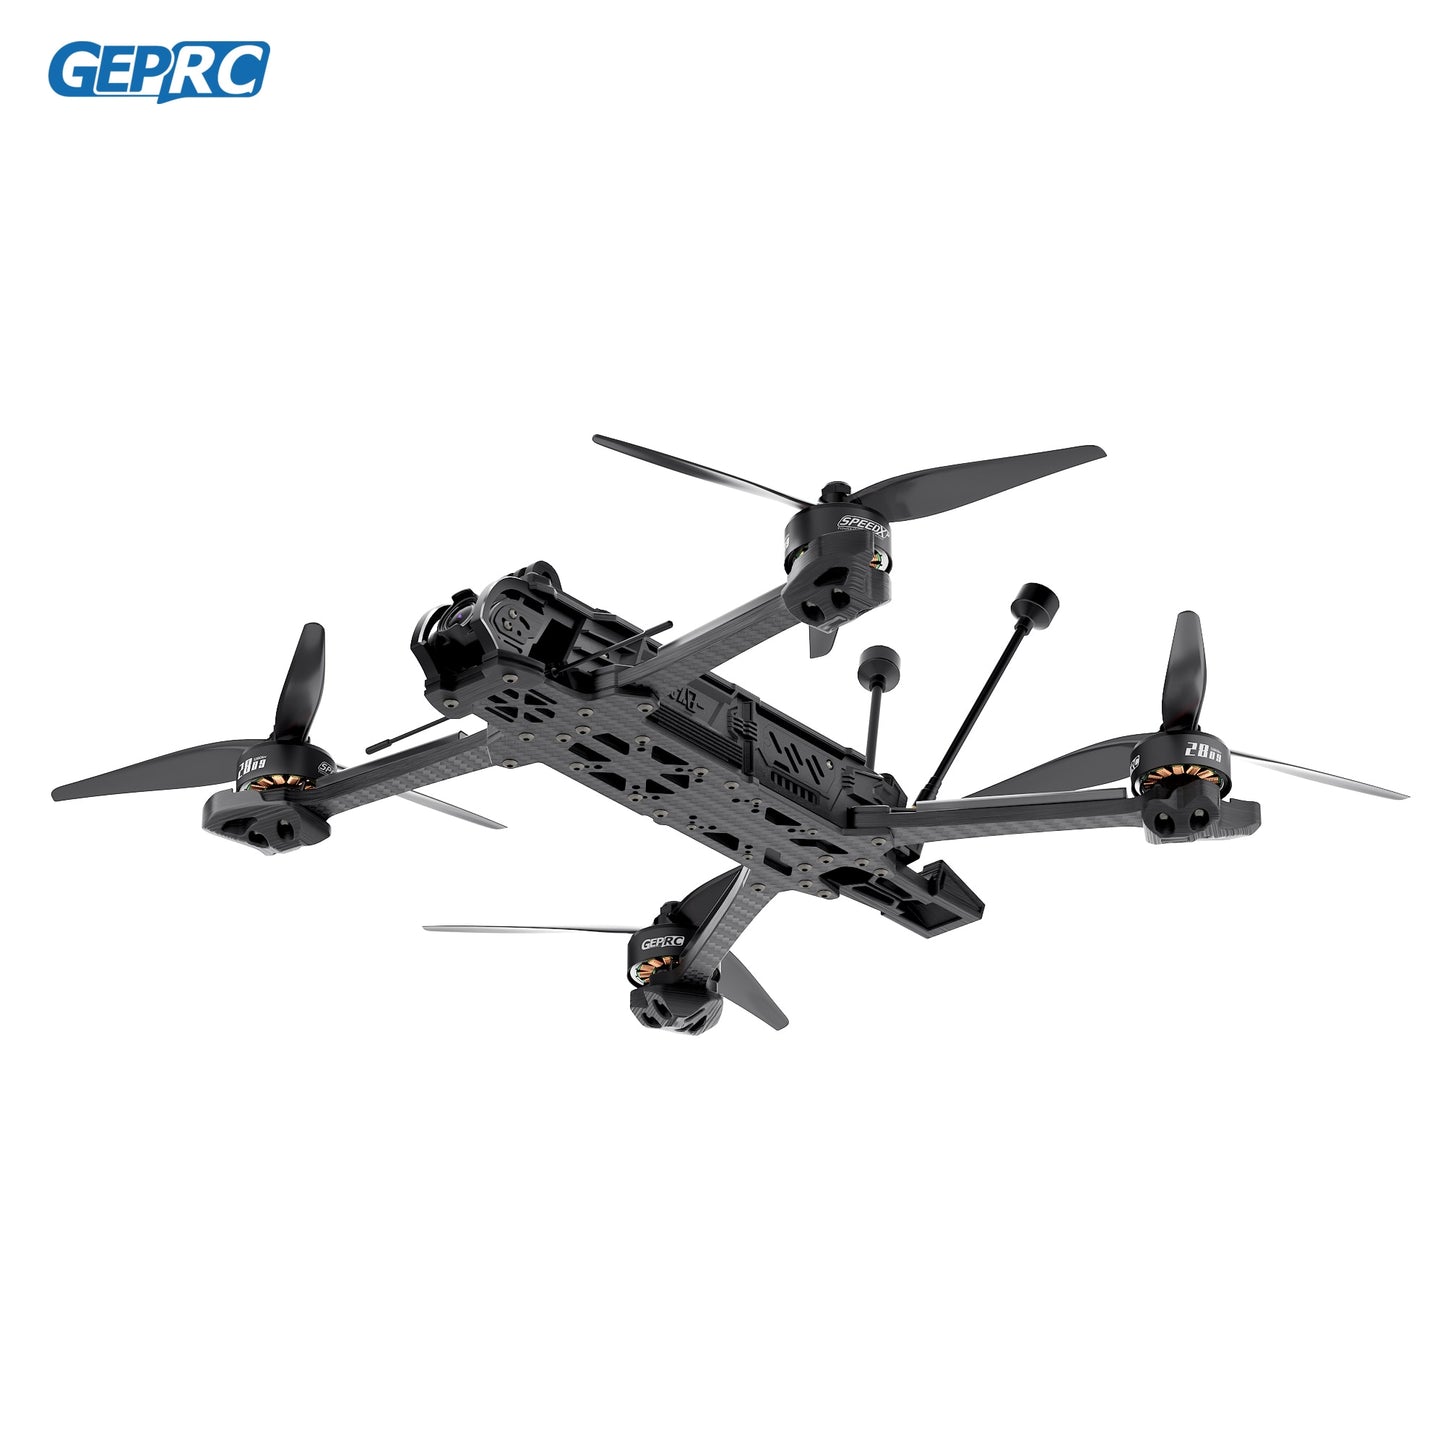 GEPRC MOZ7 HD - Wasp Long Range FPV 6S 1280KV 4K/120fps Built-in Bluetooth RC Quadcopter LongRange Freestyle Drone Rc Airplane